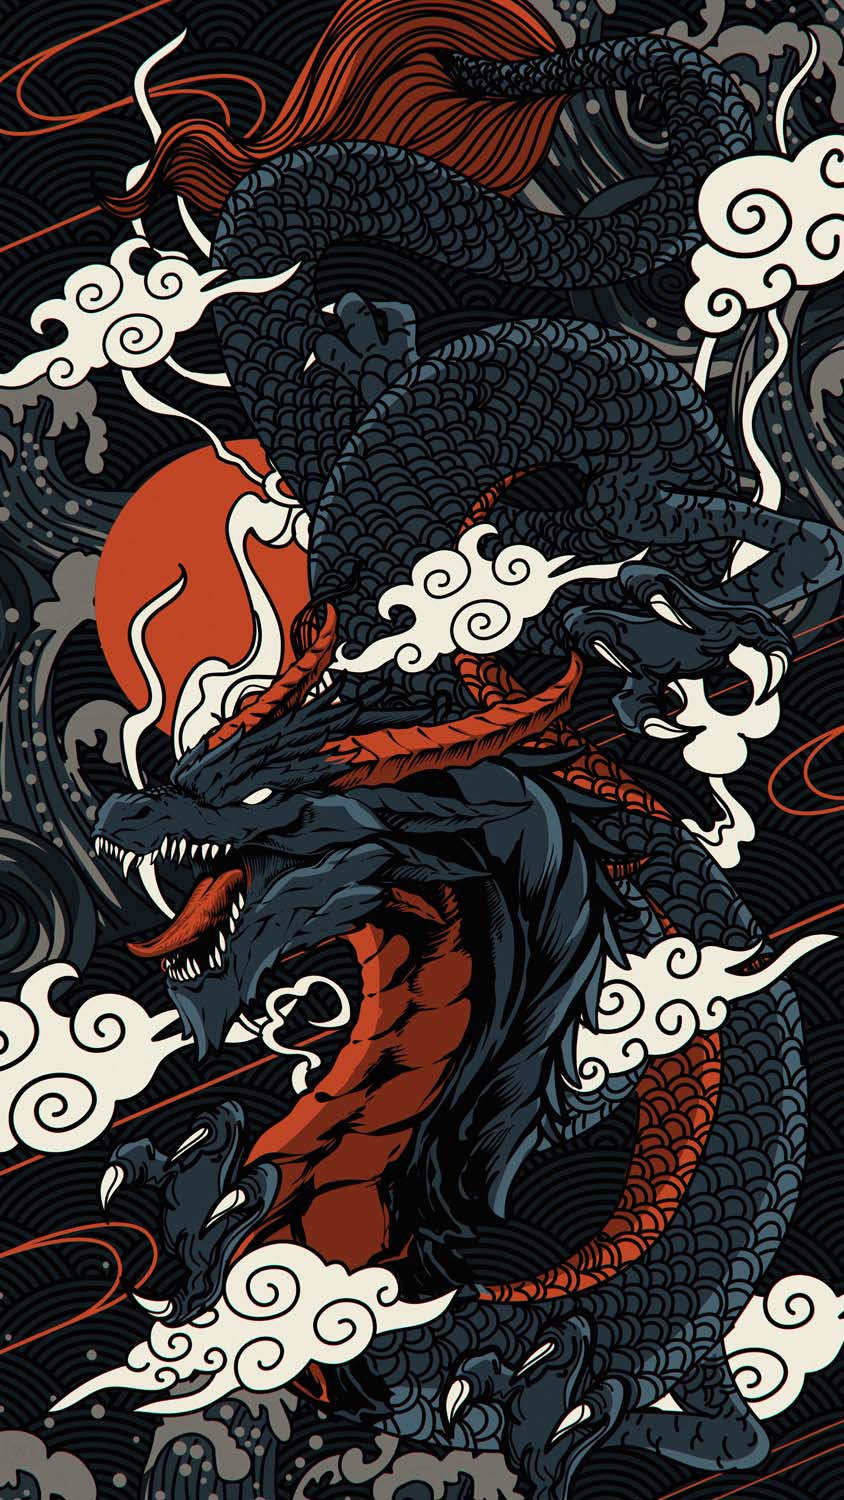 Mighty Dragon IPhone Wallpaper HD - IPhone Wallpapers : iPhone Wallpapers